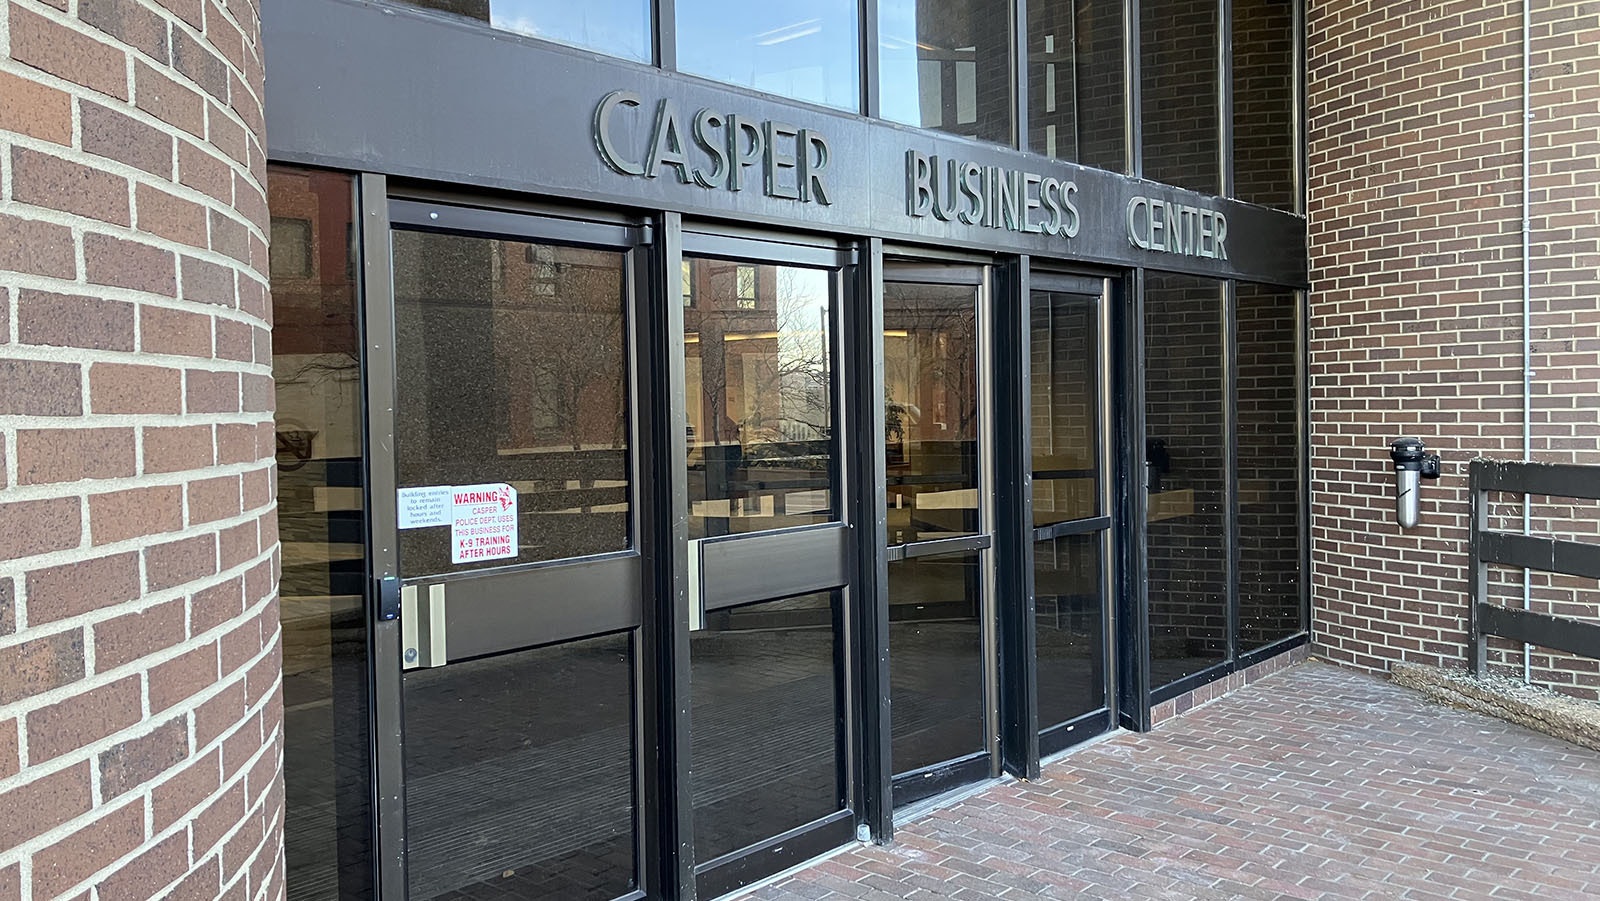 The current Casper Business Center at 123 W. First Street will be the future home of the Casper Police Department, after extensive renovations expected to cost $38 million are complete.